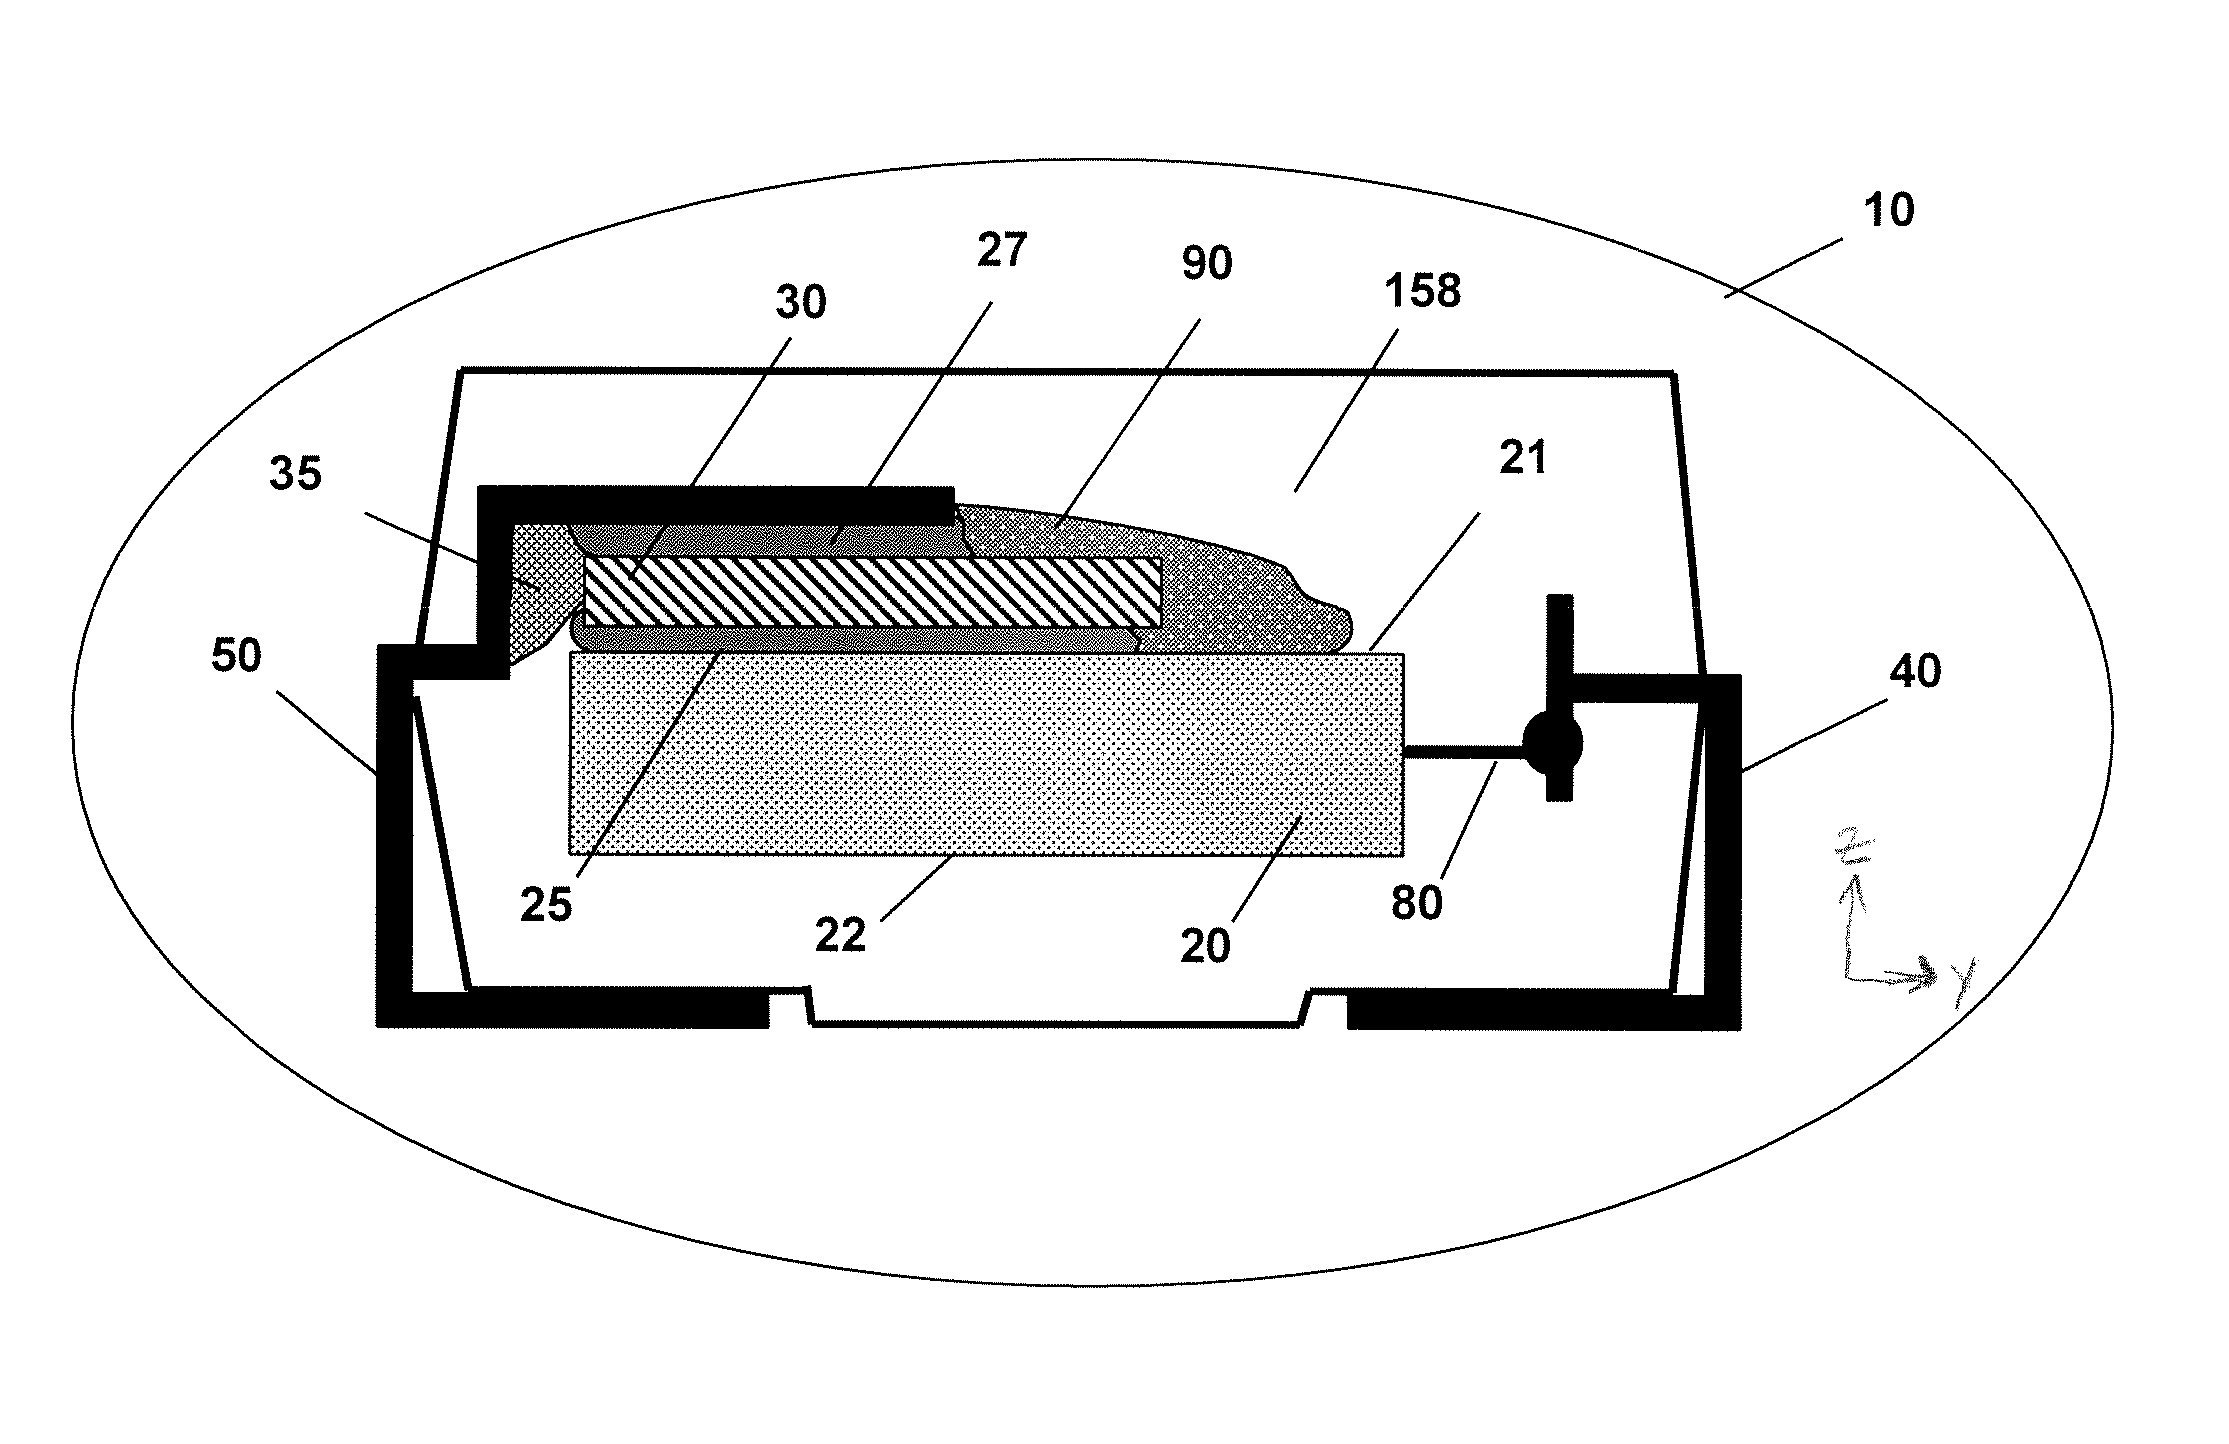 Electrolytic Capacitor Assembly Containing a Resettable Fuse